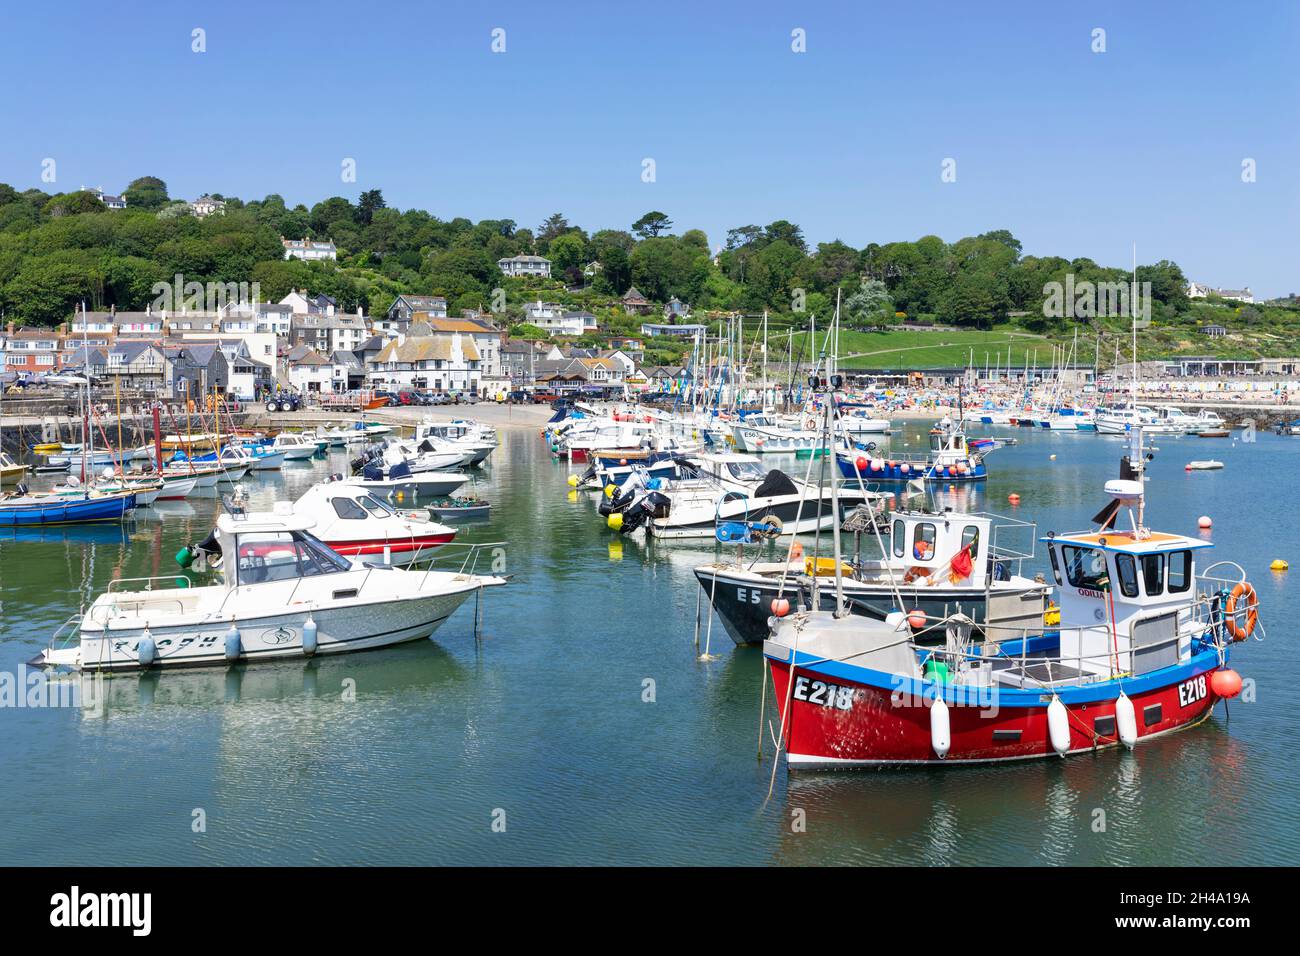 Fishing boats and Yachts in the Jurassic coast harbour at Lyme Regis Dorset England UK GB Europe Stock Photo